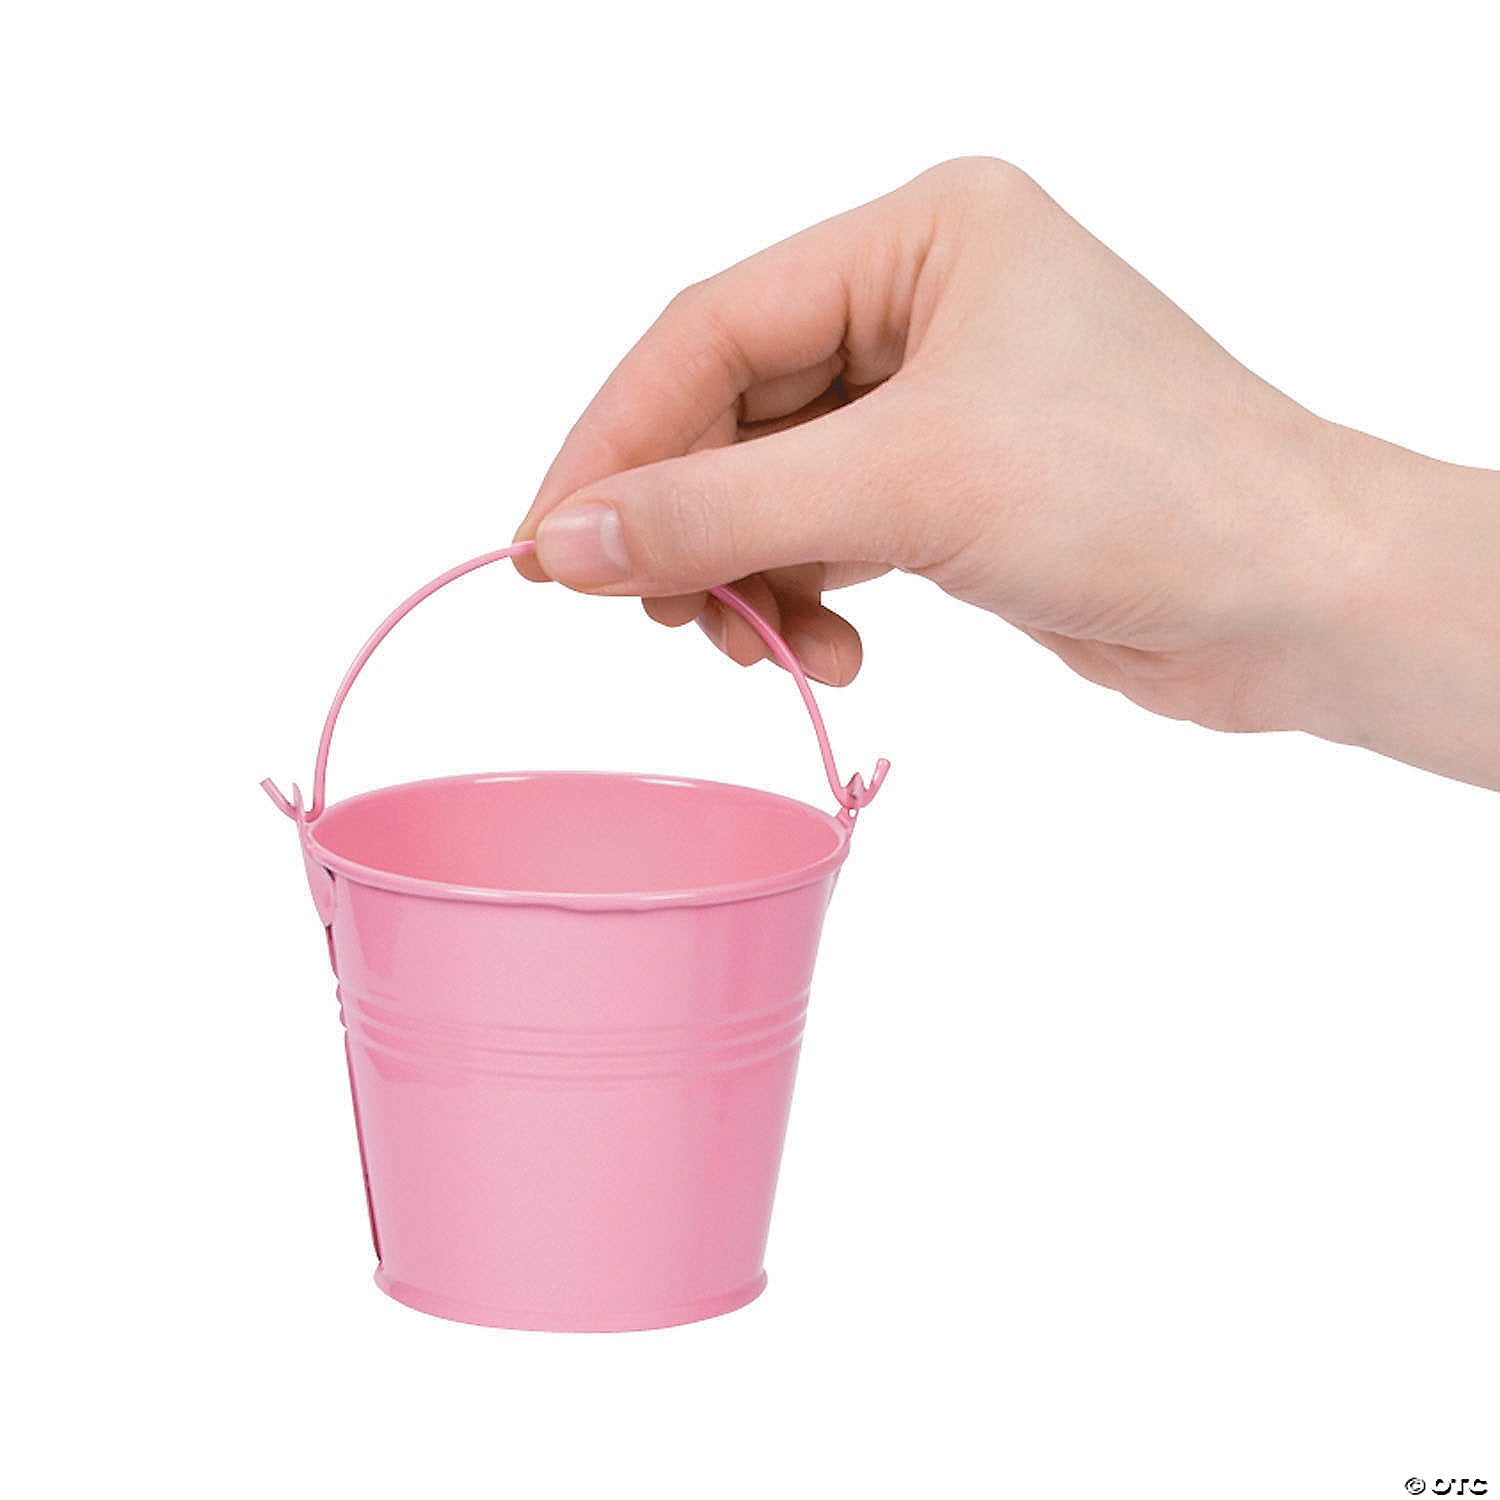 Mini, pink metal party favor pails for princess birthday party